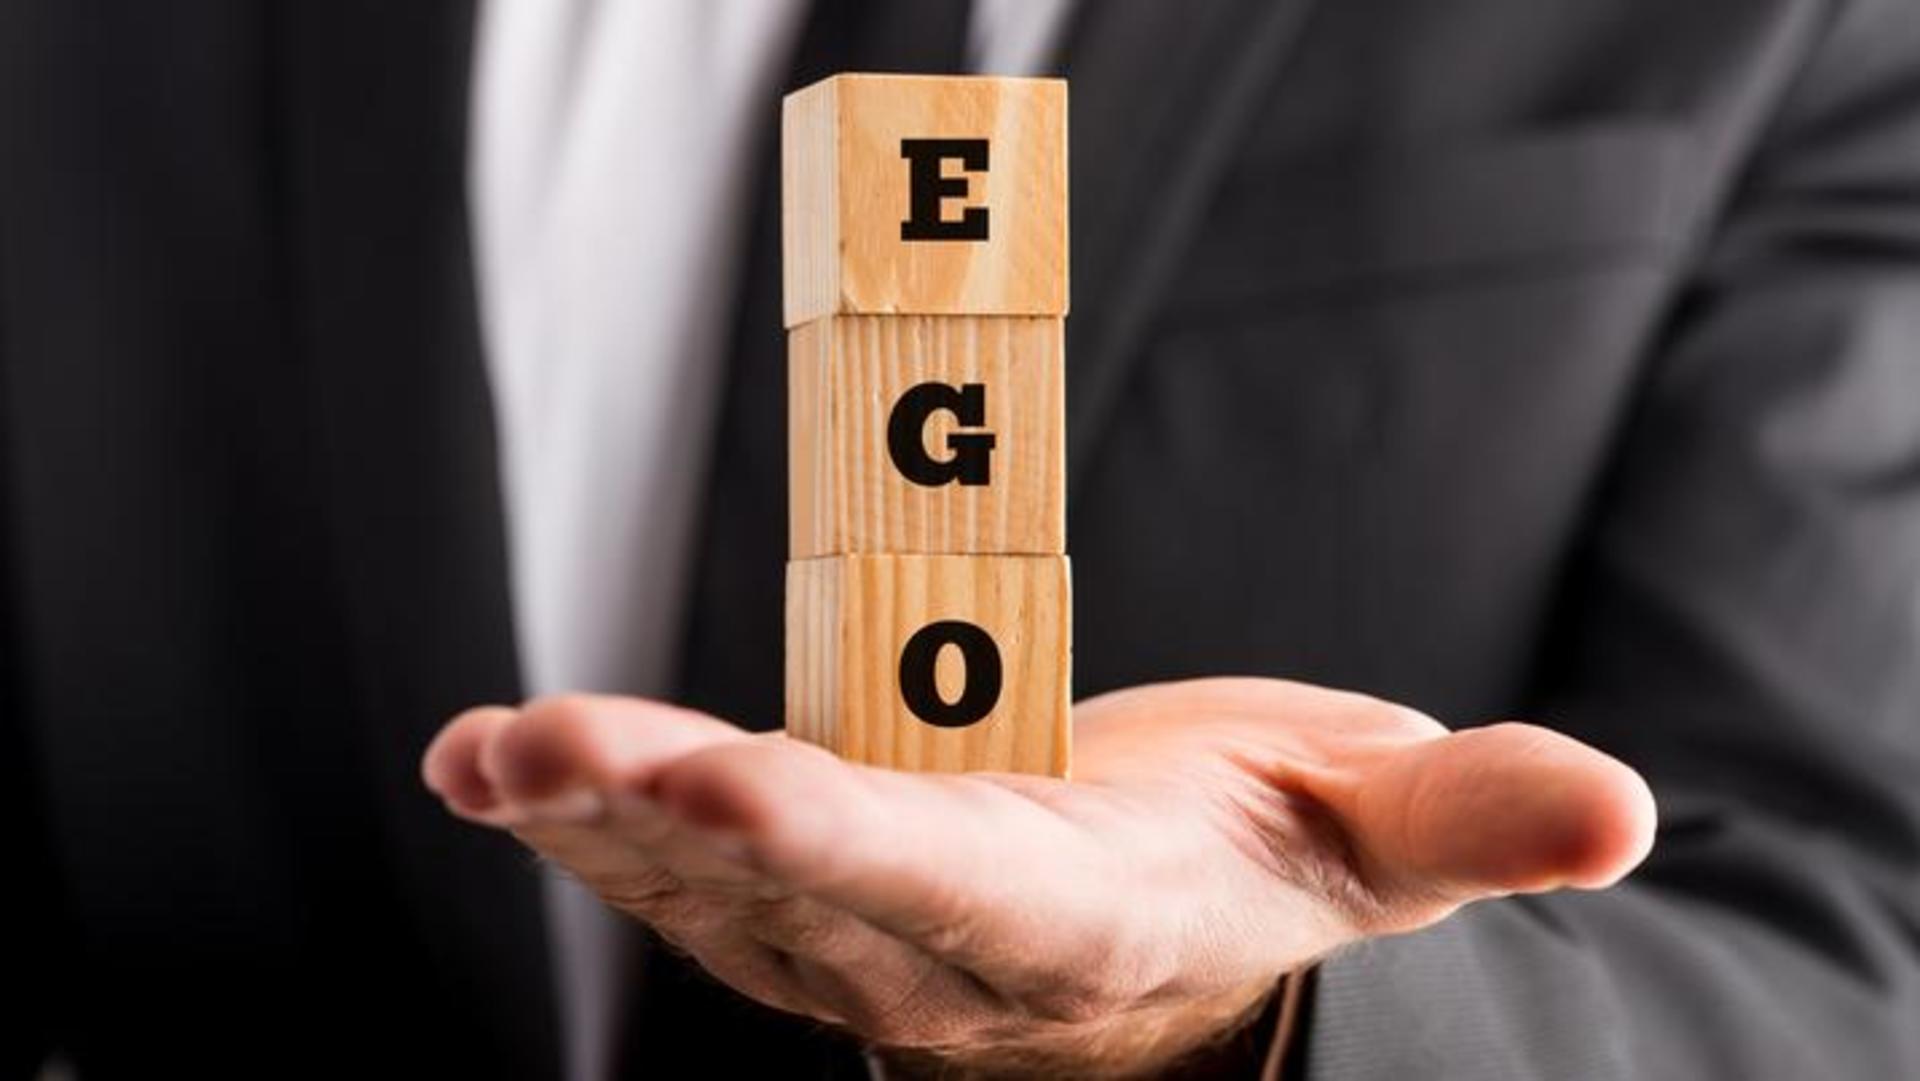 A how-to guide on keeping your ego in check